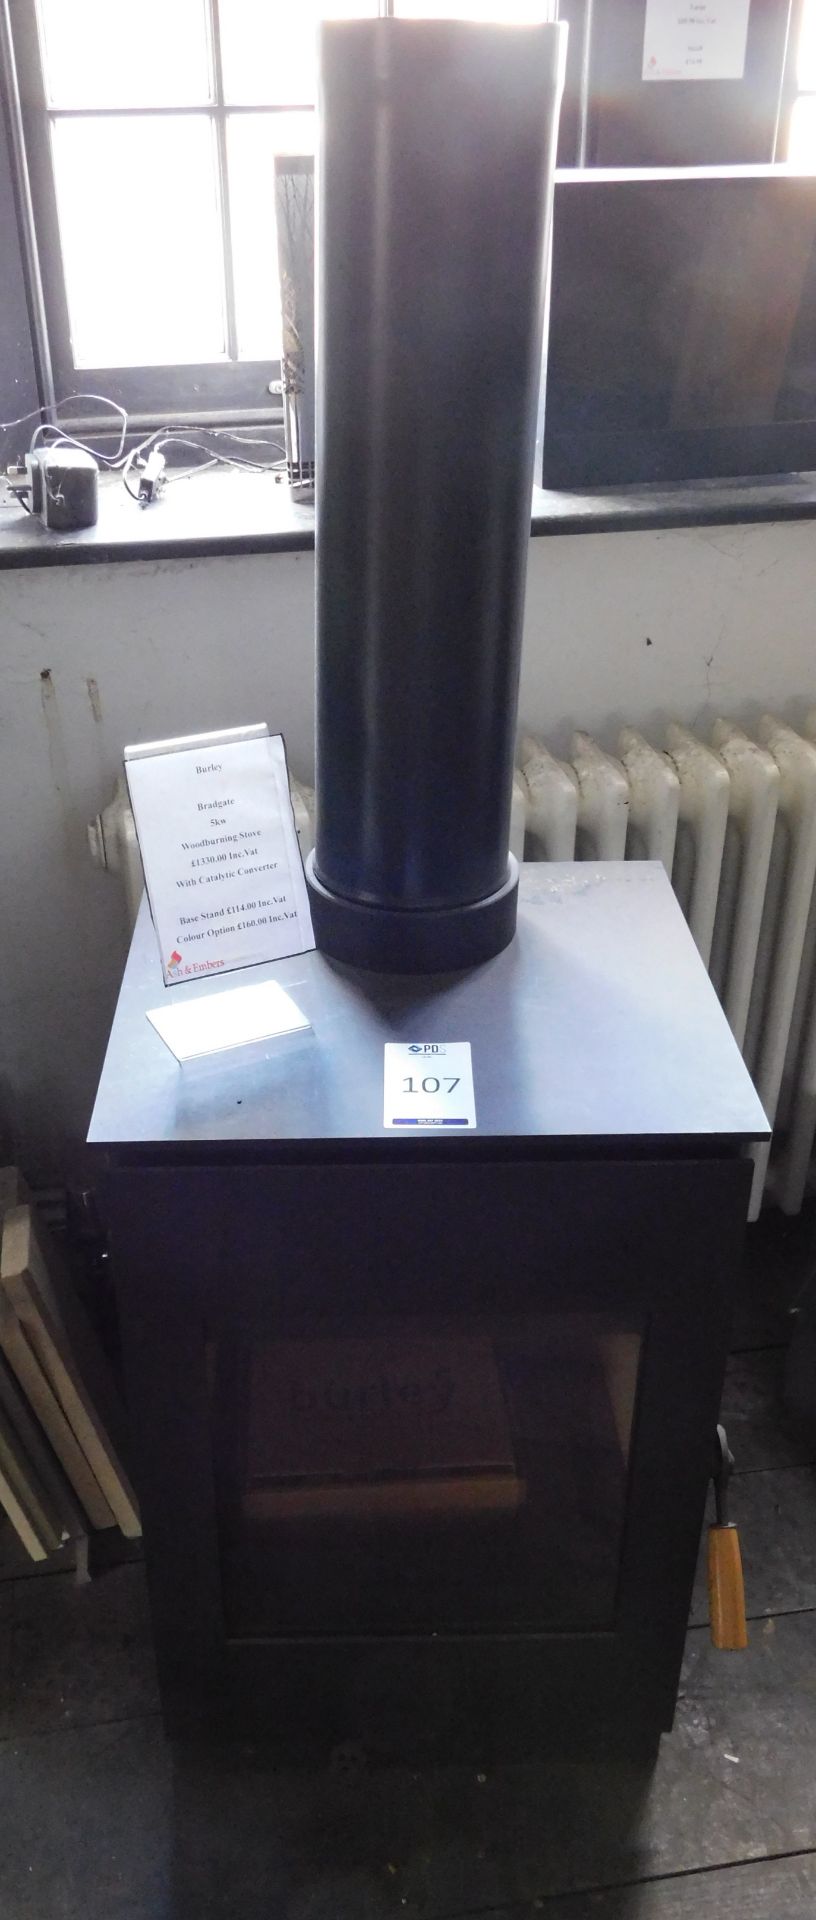 Ex-Display Burley “Bradgate 5kw Woodburning Stove (Where the company’s description/price information